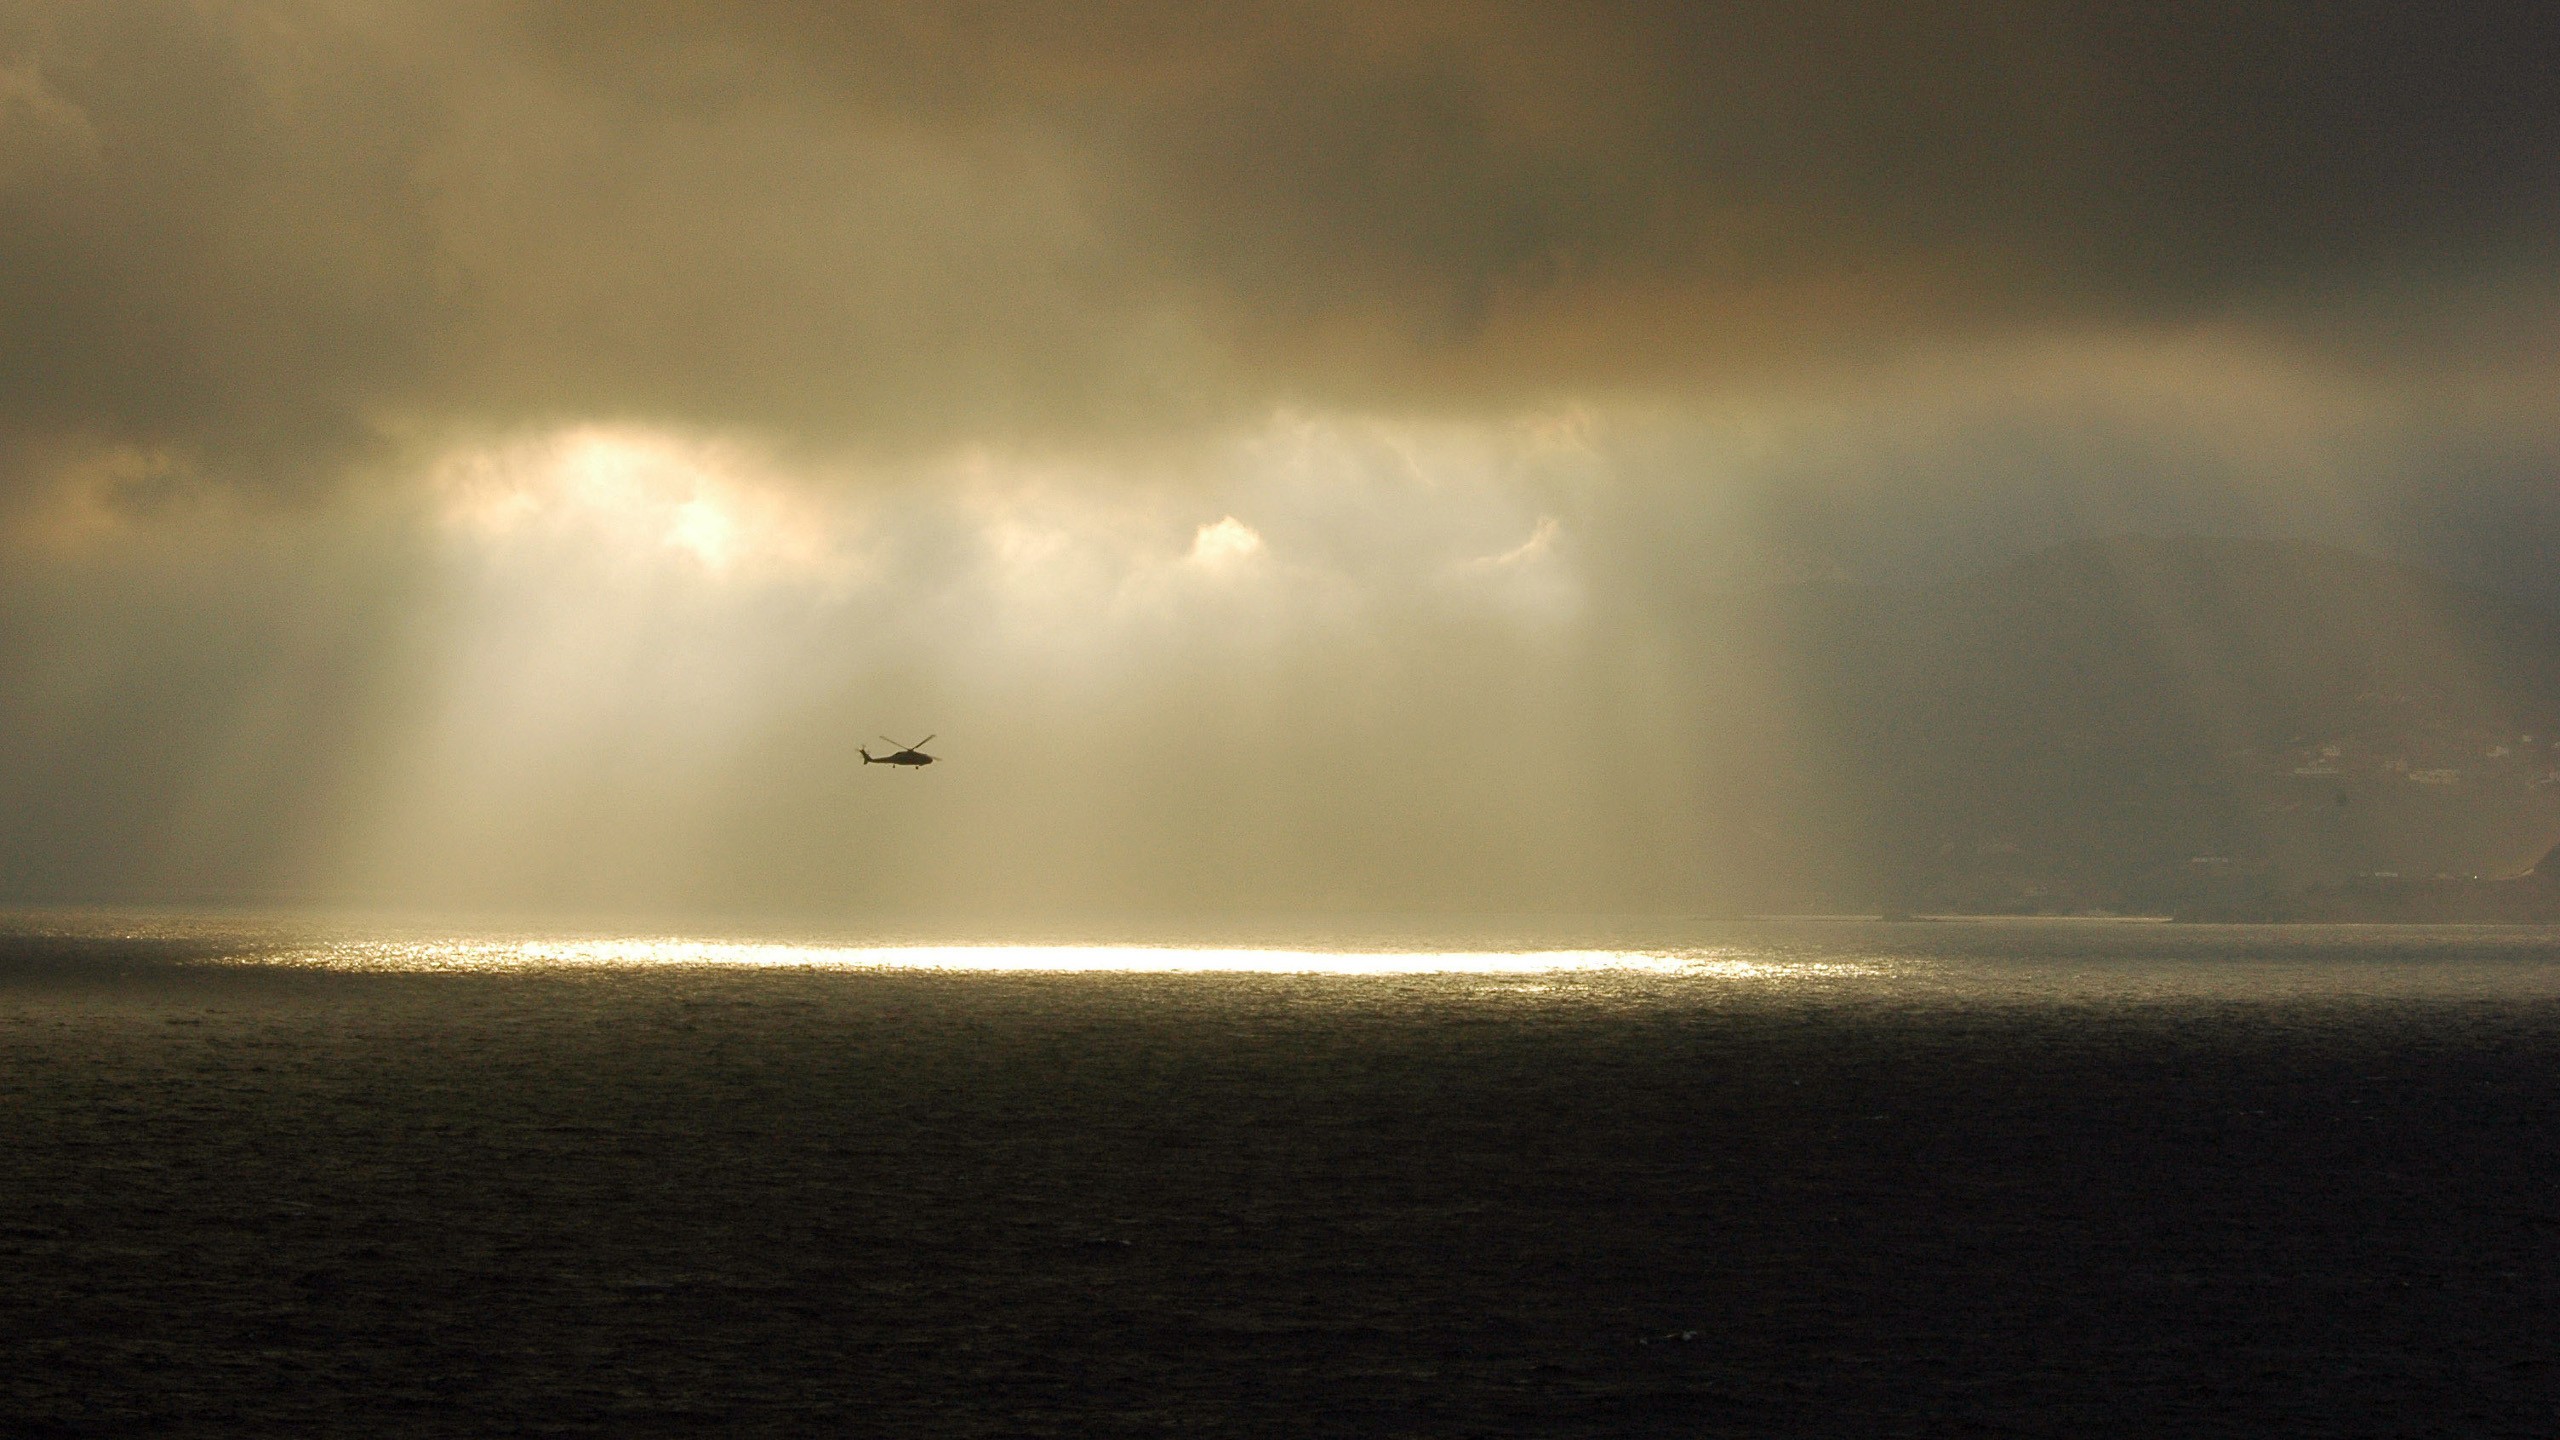 General 2560x1440 military helicopters military aircraft sea mist sunbeams clouds vehicle sky